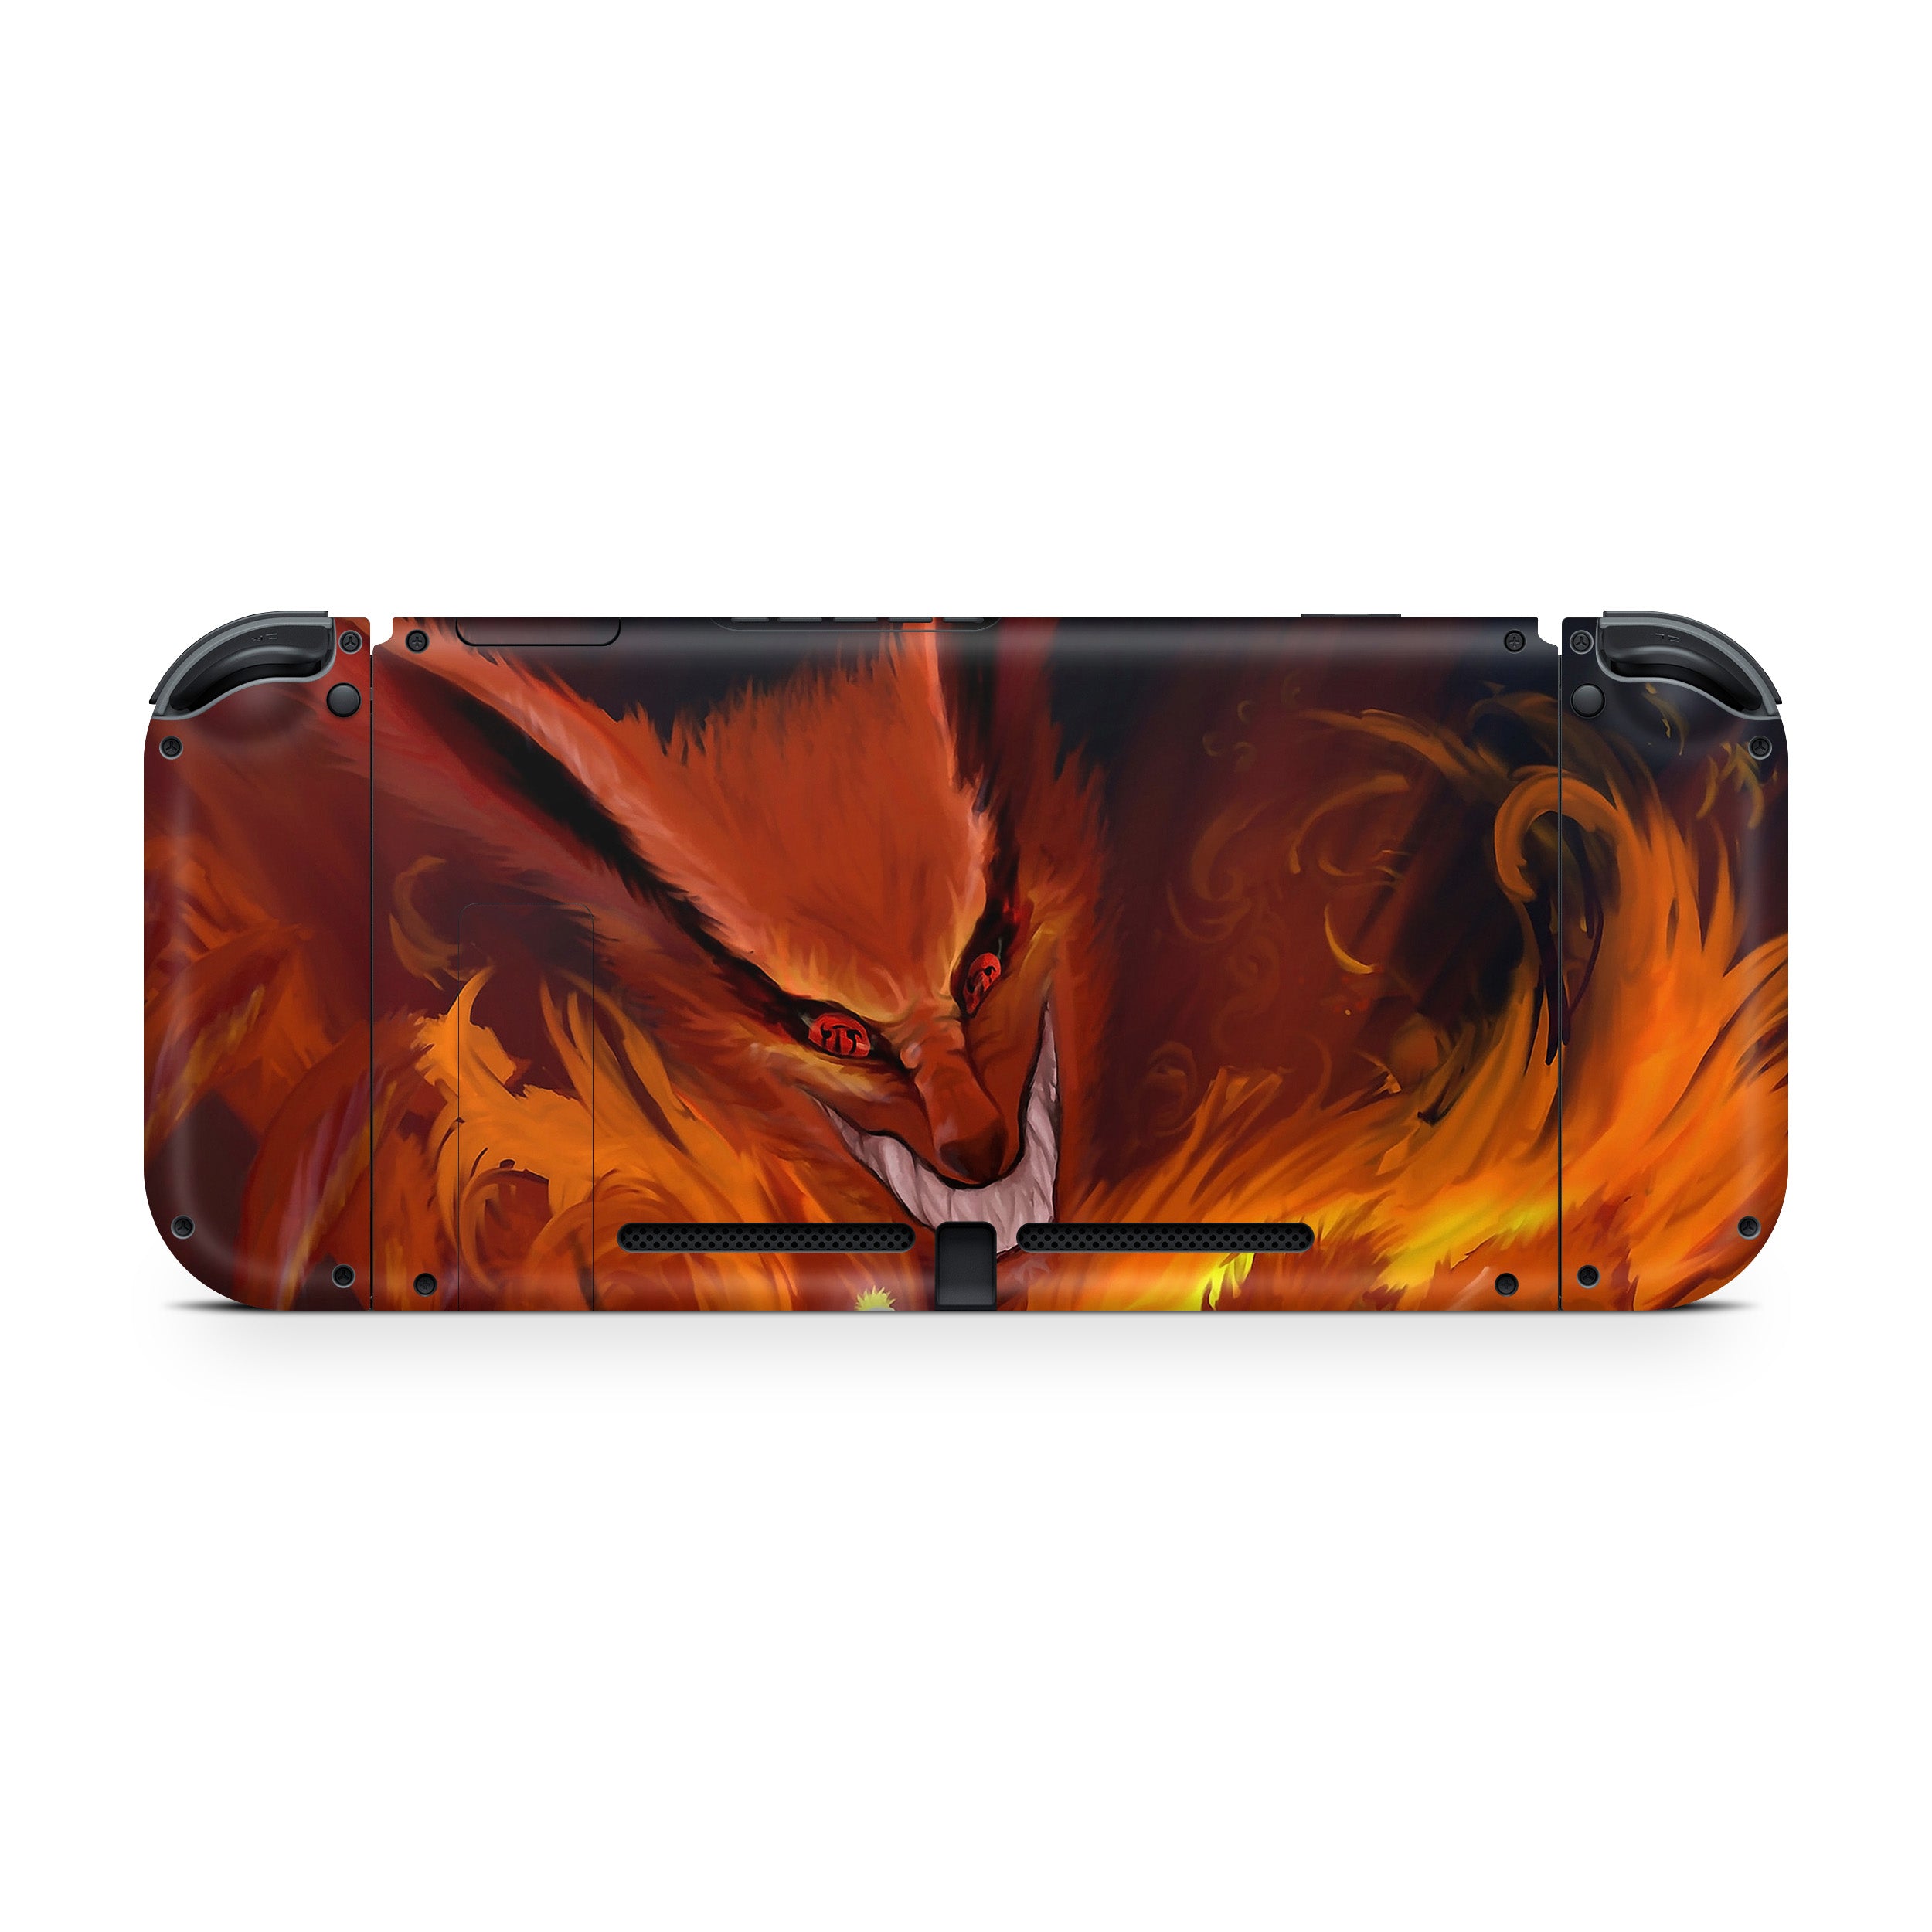 A video game skin featuring a Naruto Fire Wolf design for the Nintendo Switch.